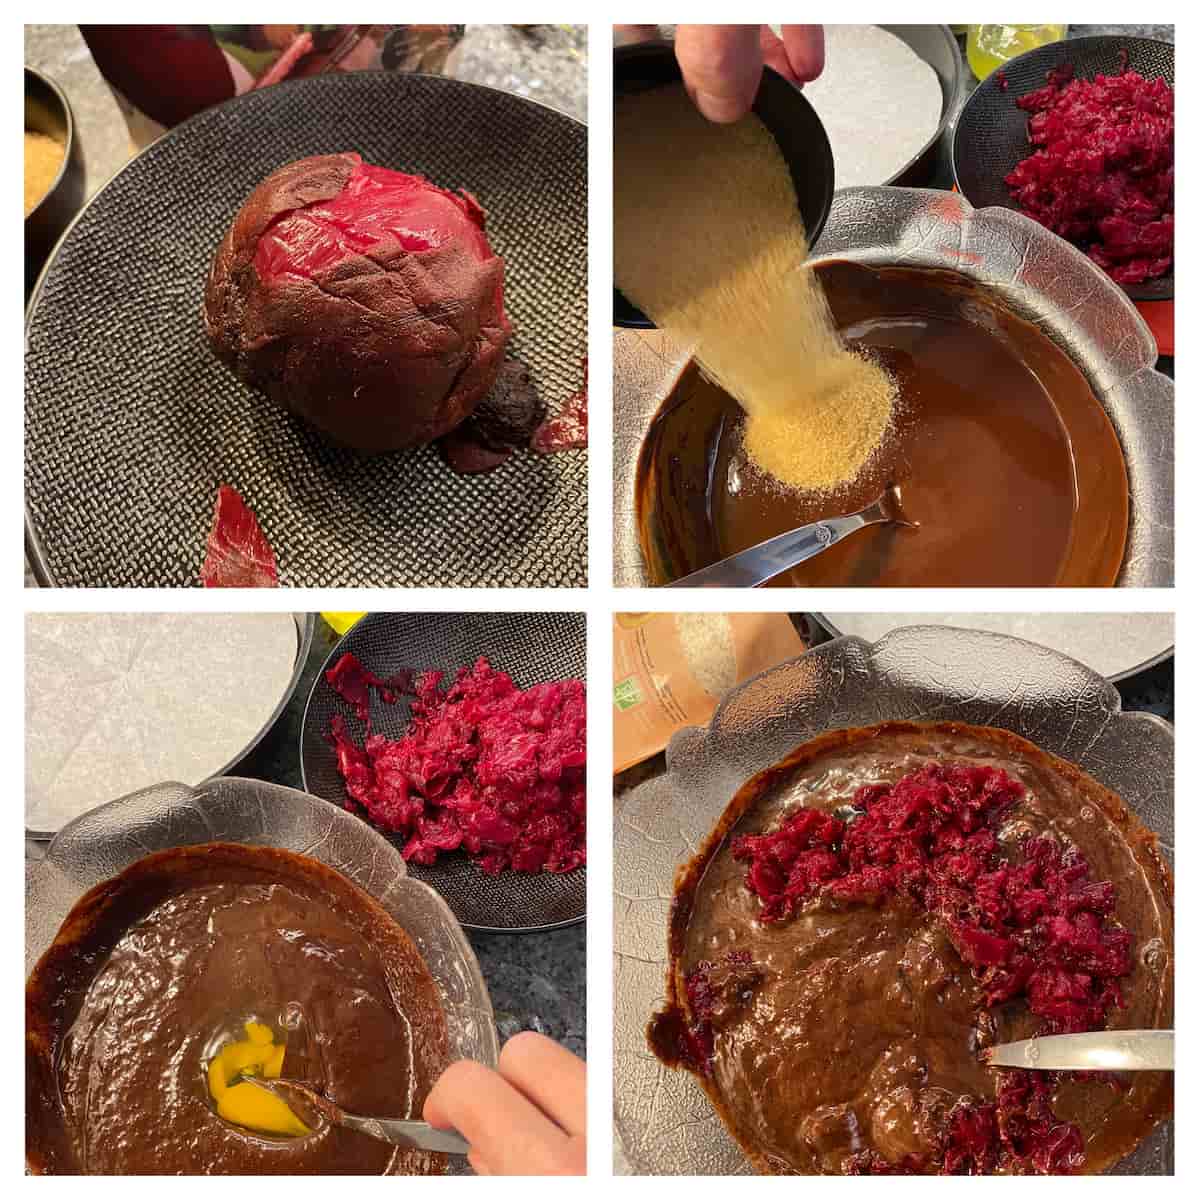 4 steps in making cake - melting chocolate with grated cooked beetroot and adding eggs